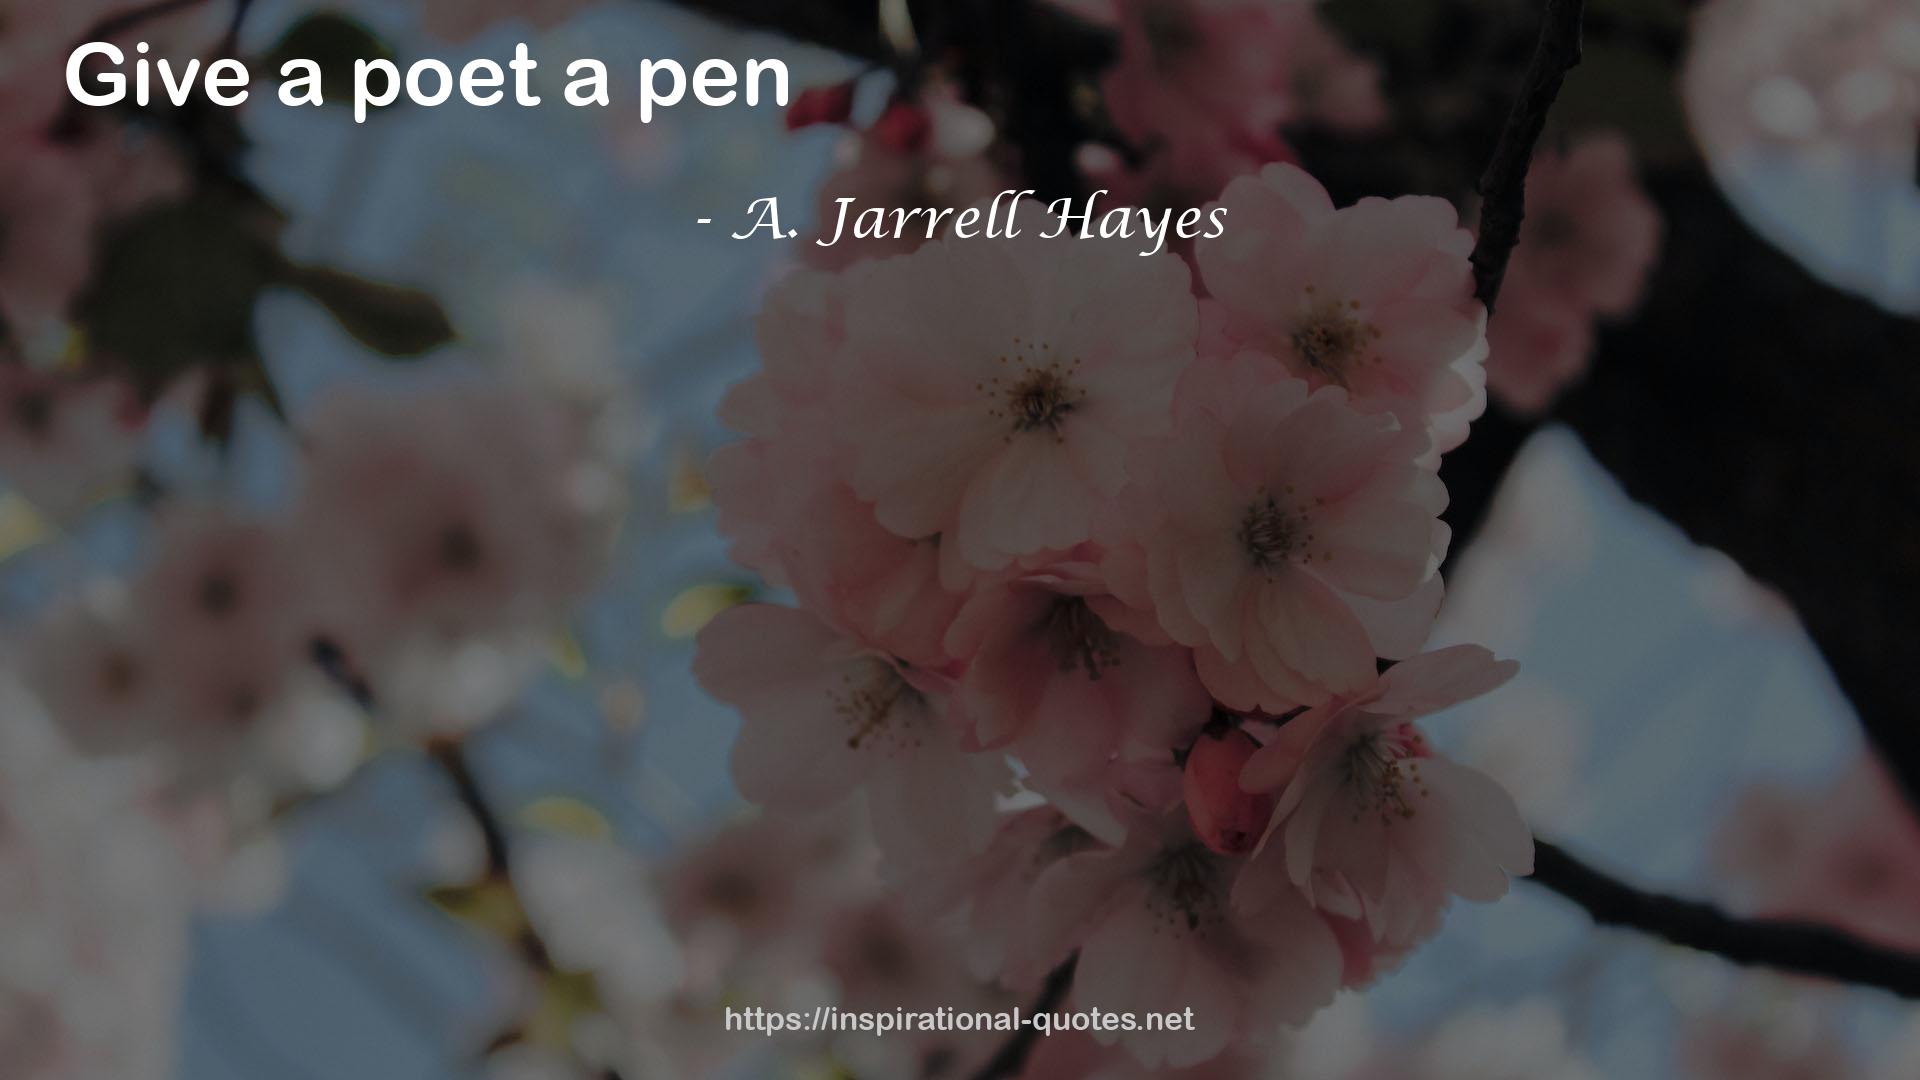 A. Jarrell Hayes QUOTES